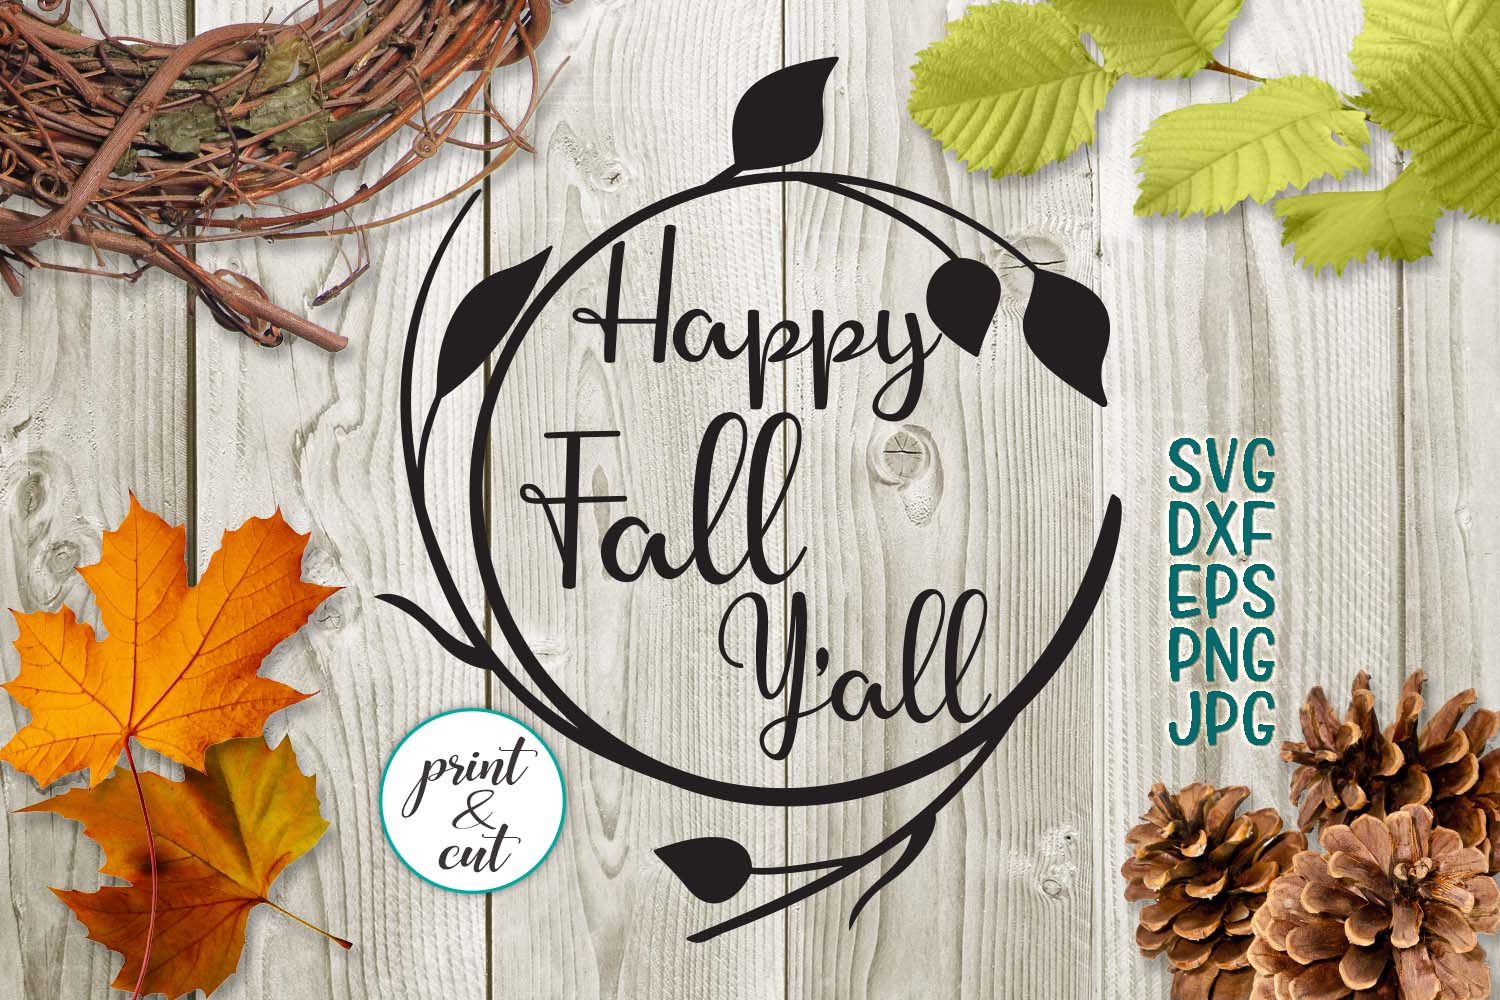 happy-fall-y-all-yall-svg-dxf-vinyl-paper-cutting-template-123947